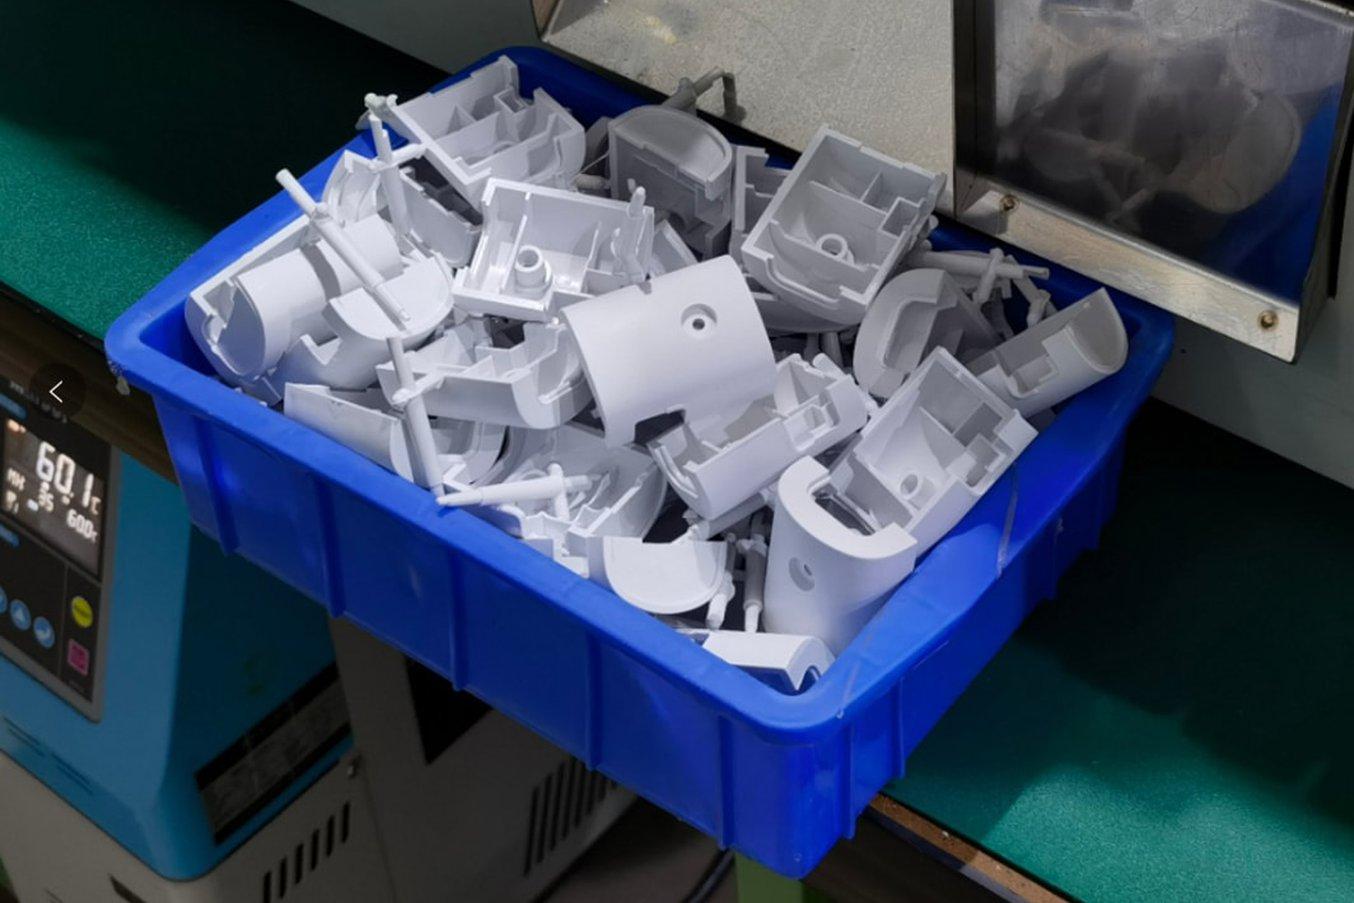 Freshly injection-molded ABS control box housings using the Rigid 10K molds.